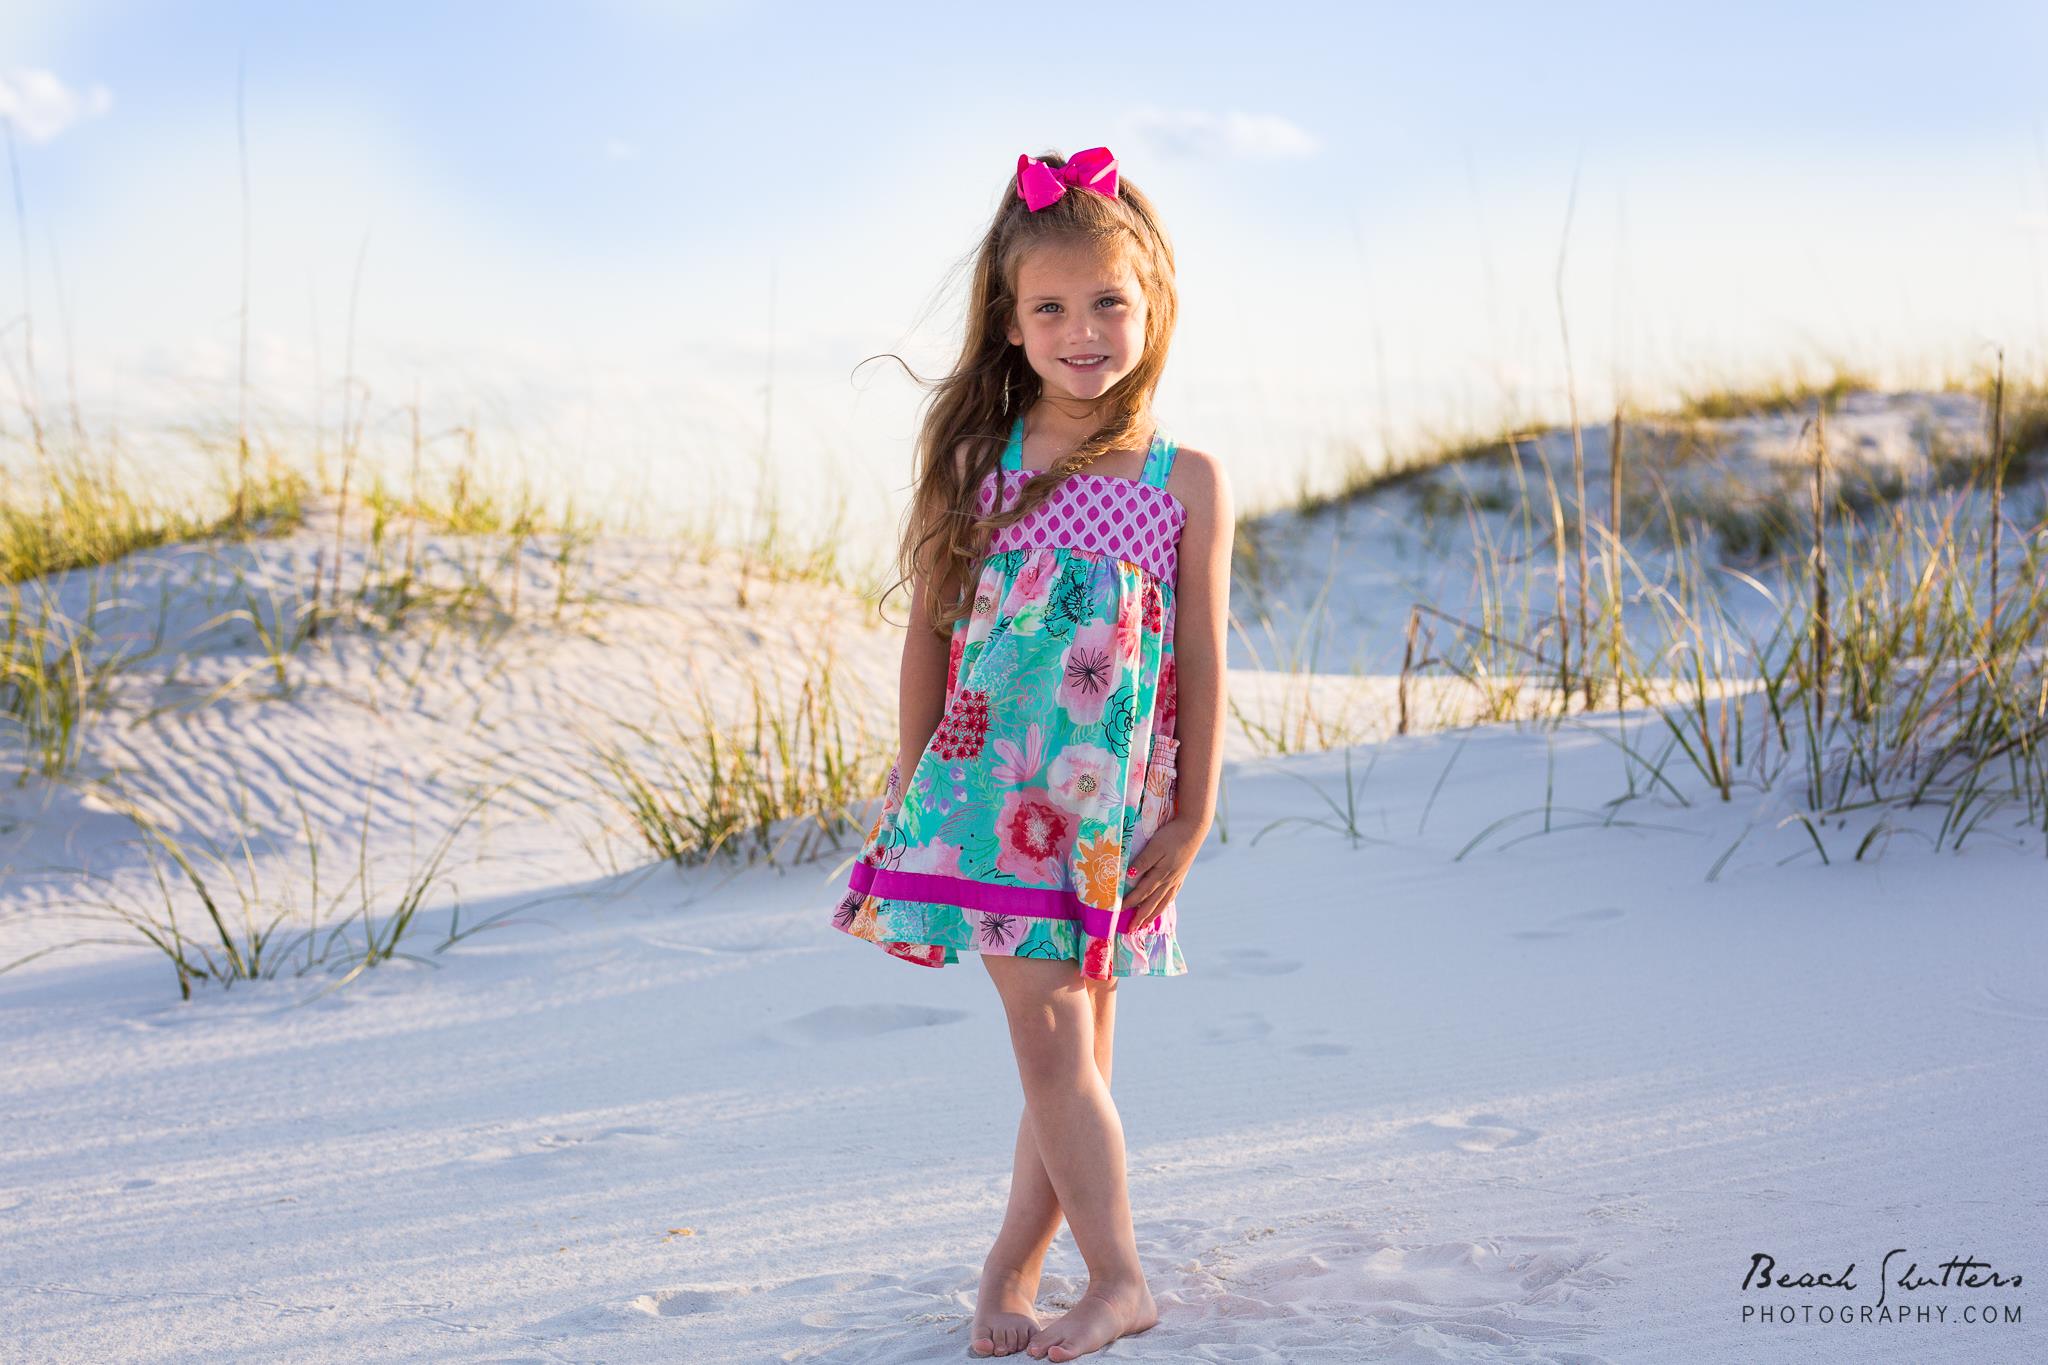 Gulf Shores photographers outfit suggestions